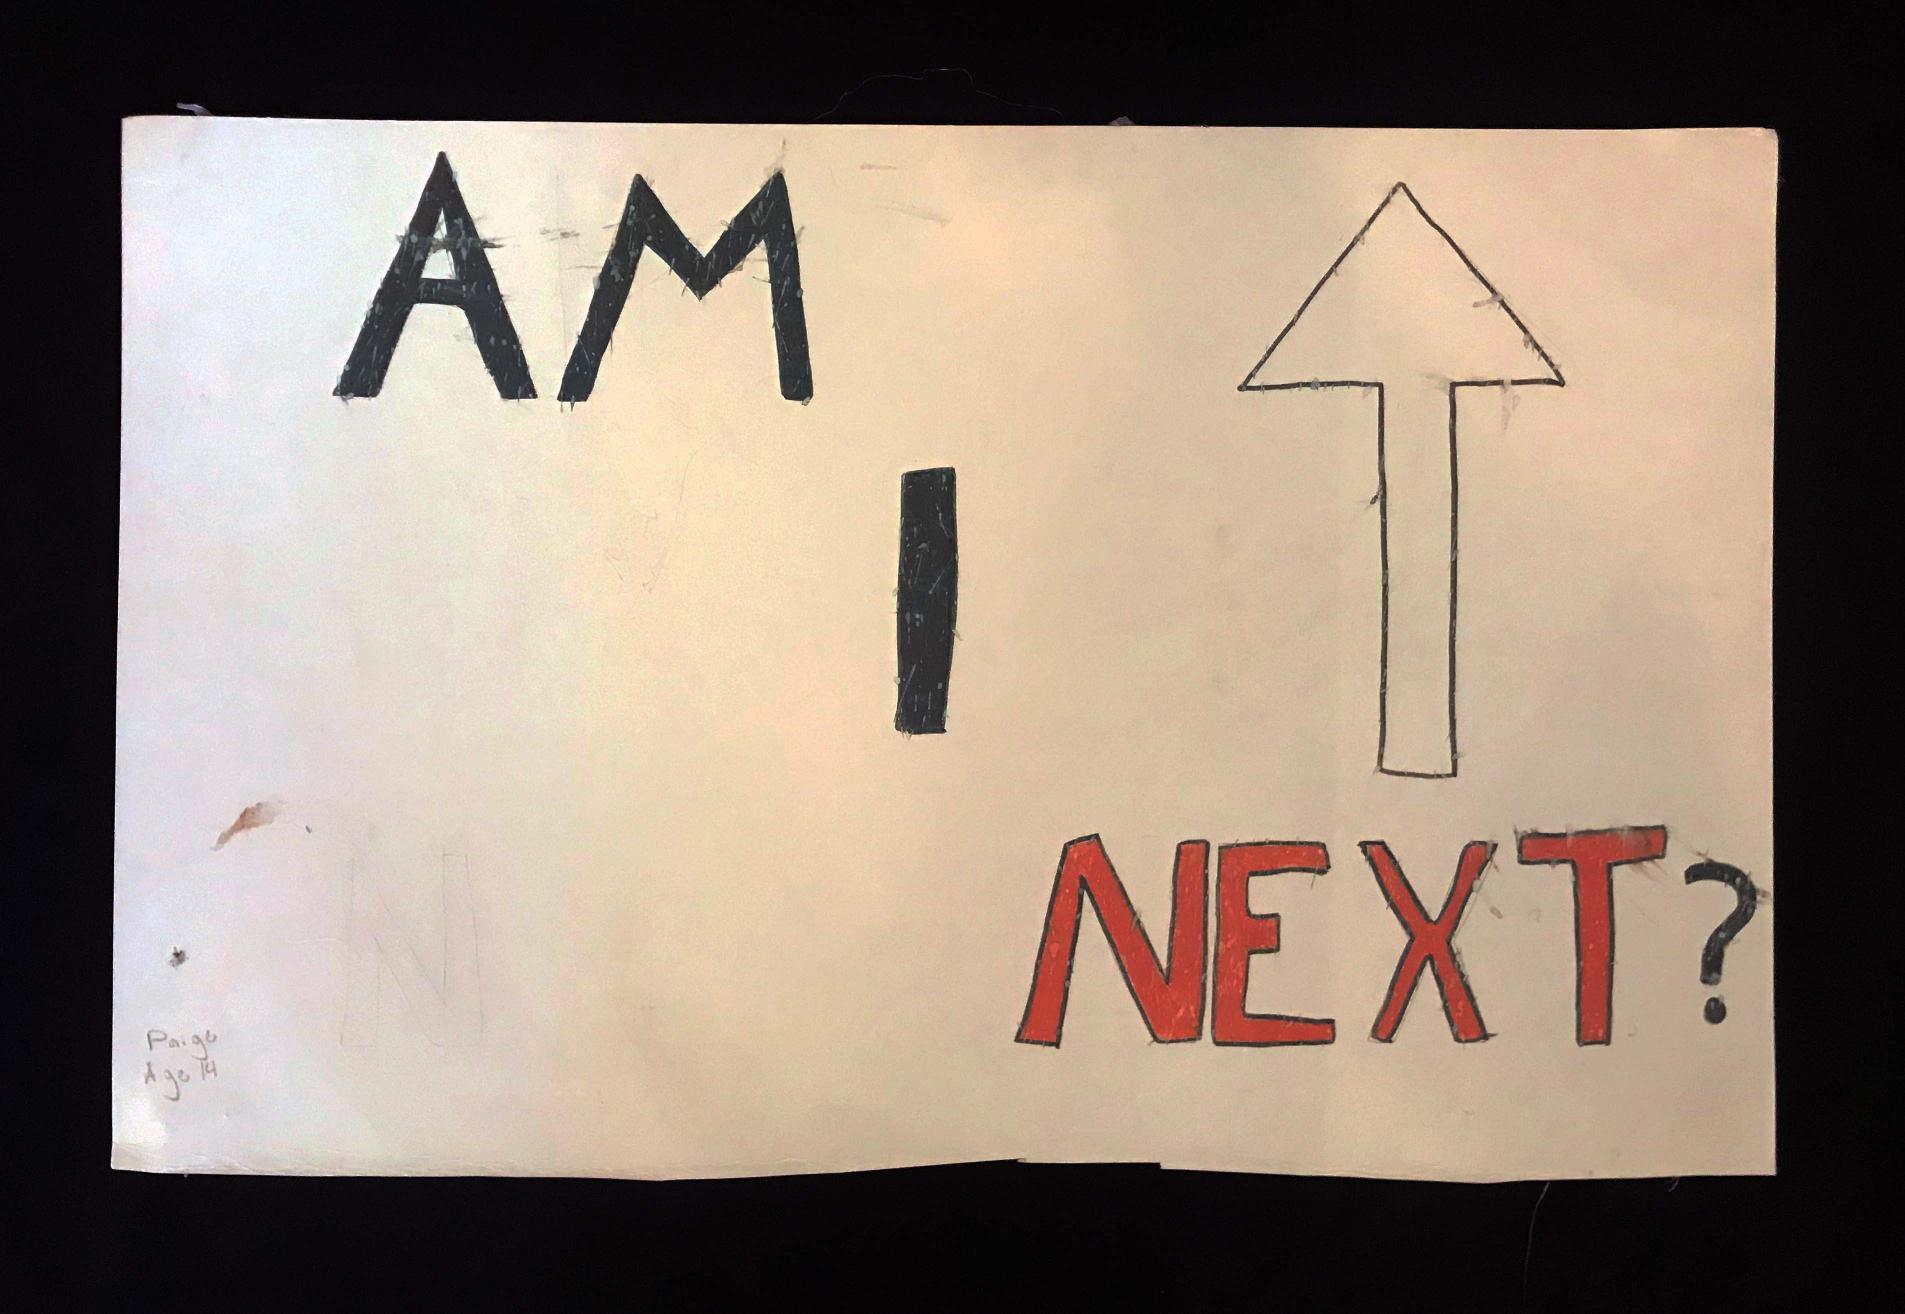 Charlotte March for Our Lives, 2018. Sign reads: "Am I next?"